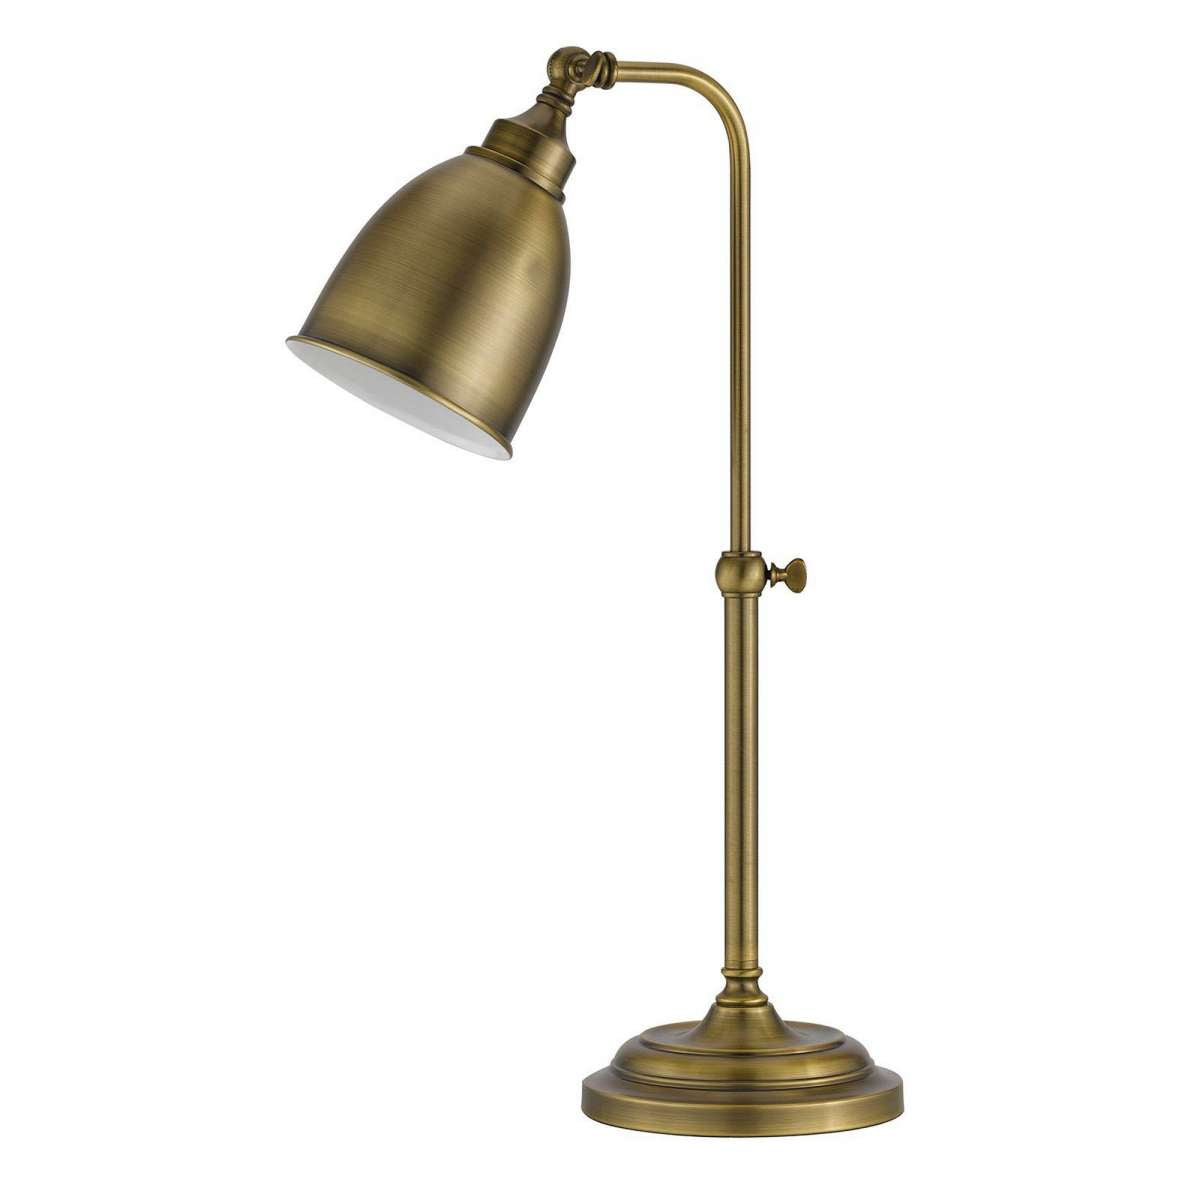 Metal Round 25" Table Lamp With Adjustable Pole, Antique Bronze By Benzara